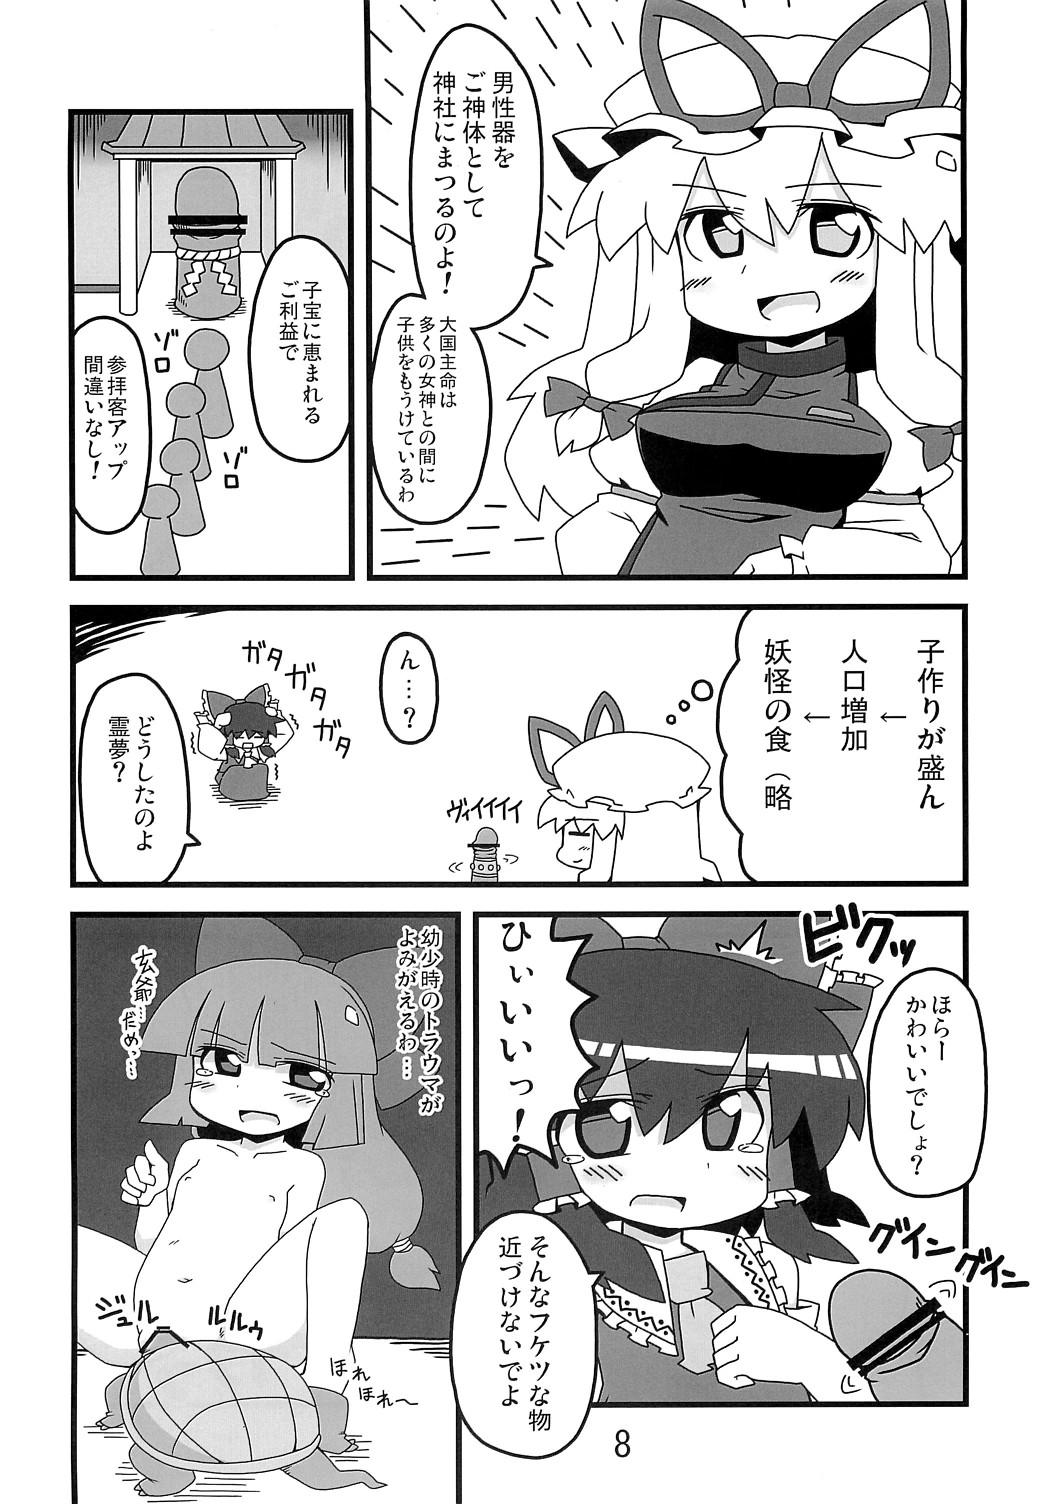 Boy Fuck Girl 東方豊年祭 - Touhou project Spank - Page 7